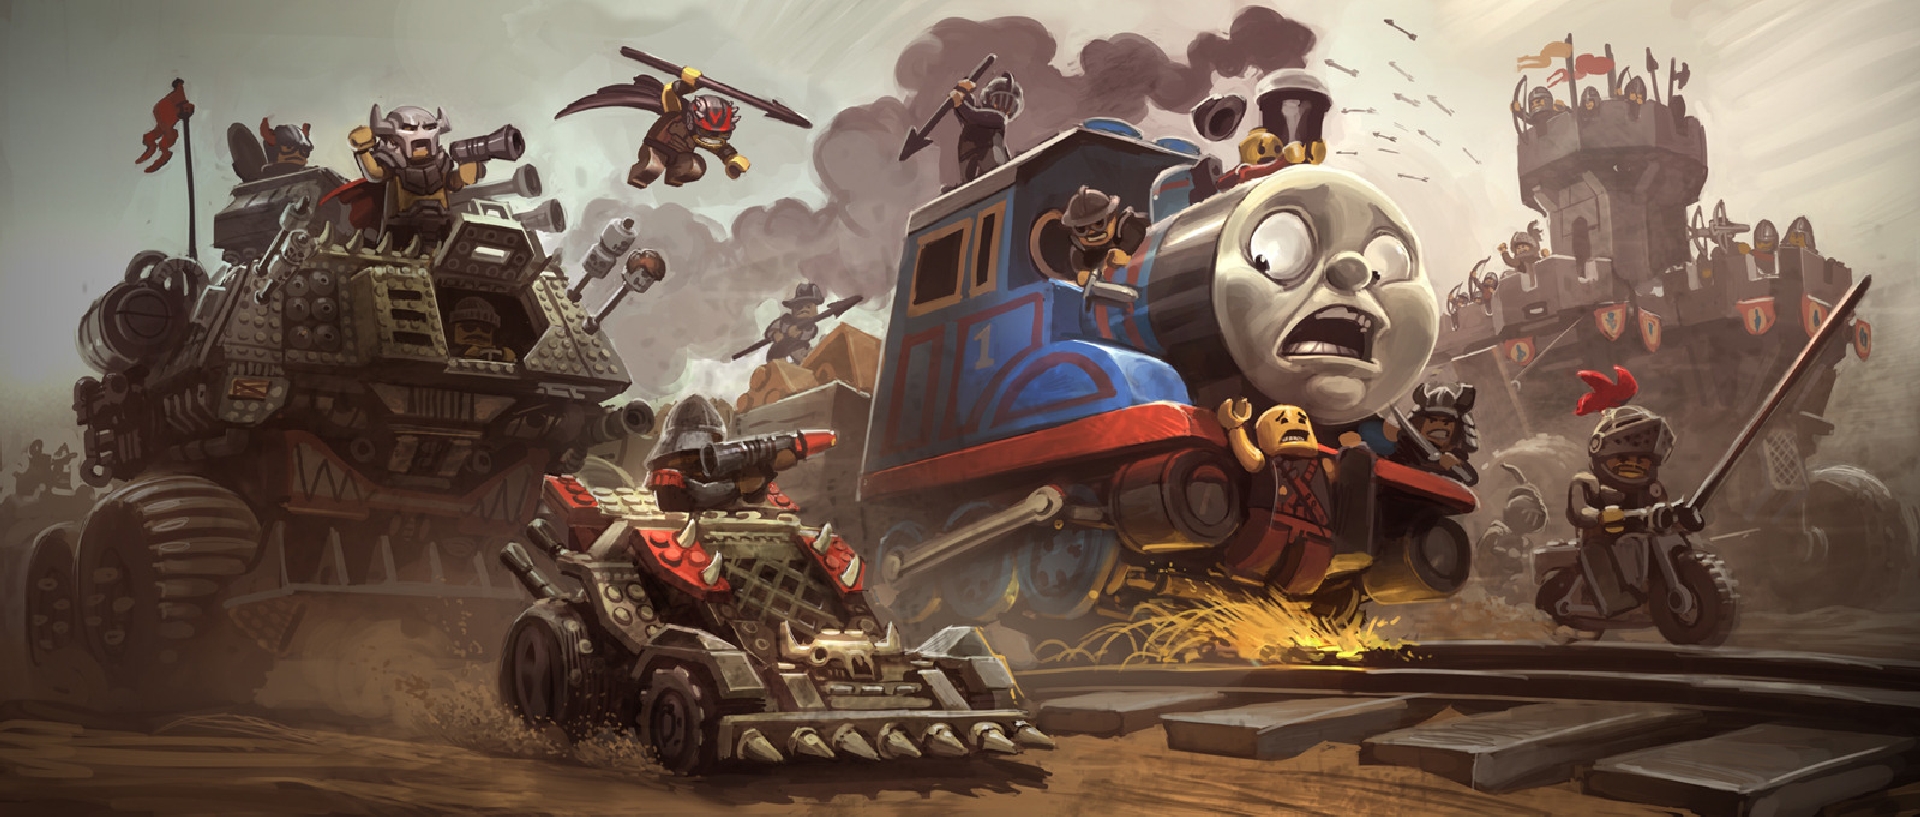 Thomas The Tank Engine Wallpaper And Achtergrond